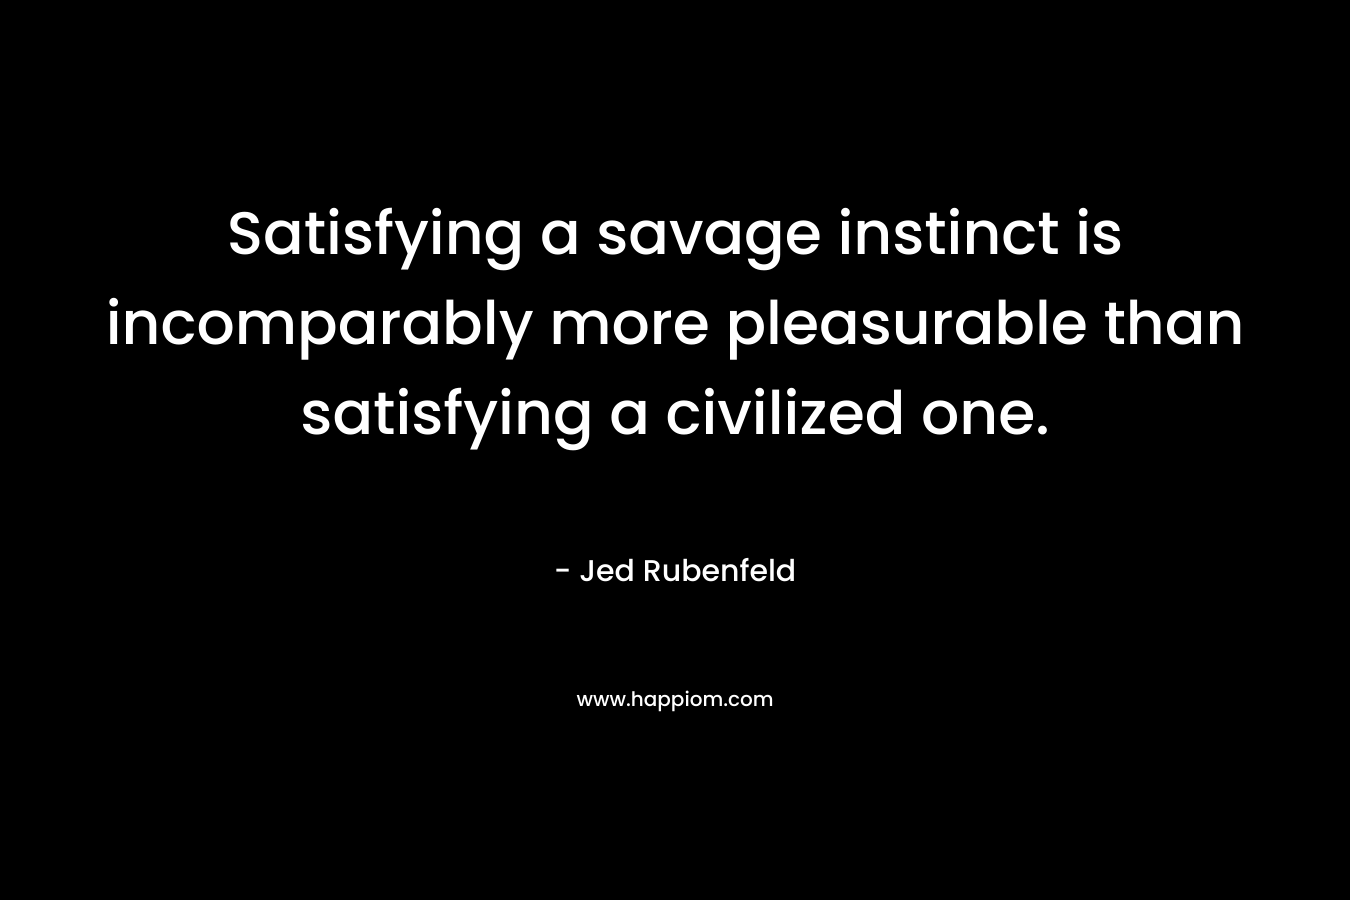 Satisfying a savage instinct is incomparably more pleasurable than satisfying a civilized one. – Jed Rubenfeld